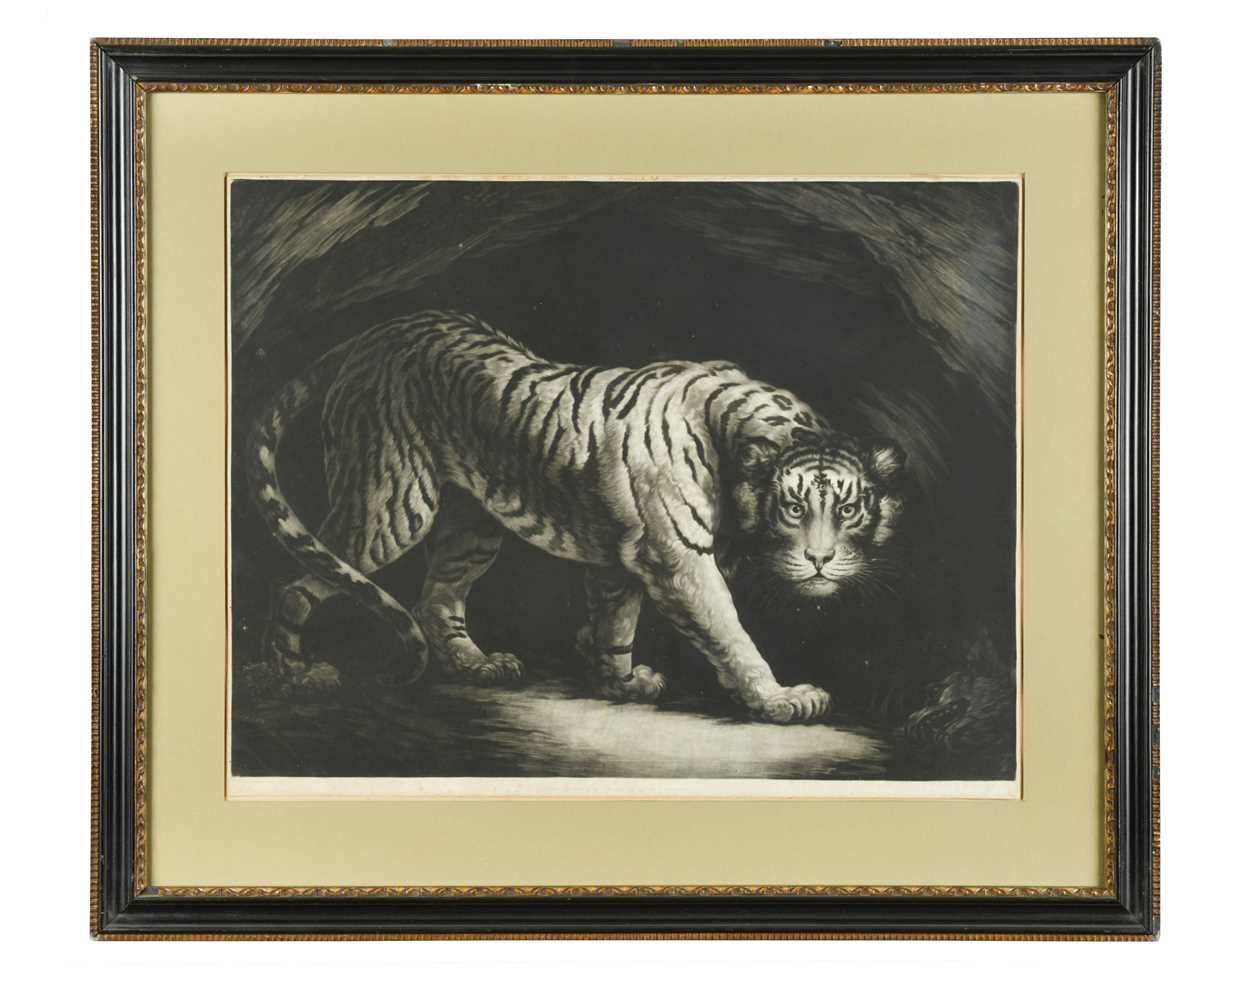 John Murphy after James Northcote, R. A., A Tyger, mezzotint, published by John & Jo'hah Boydell, - Image 2 of 9